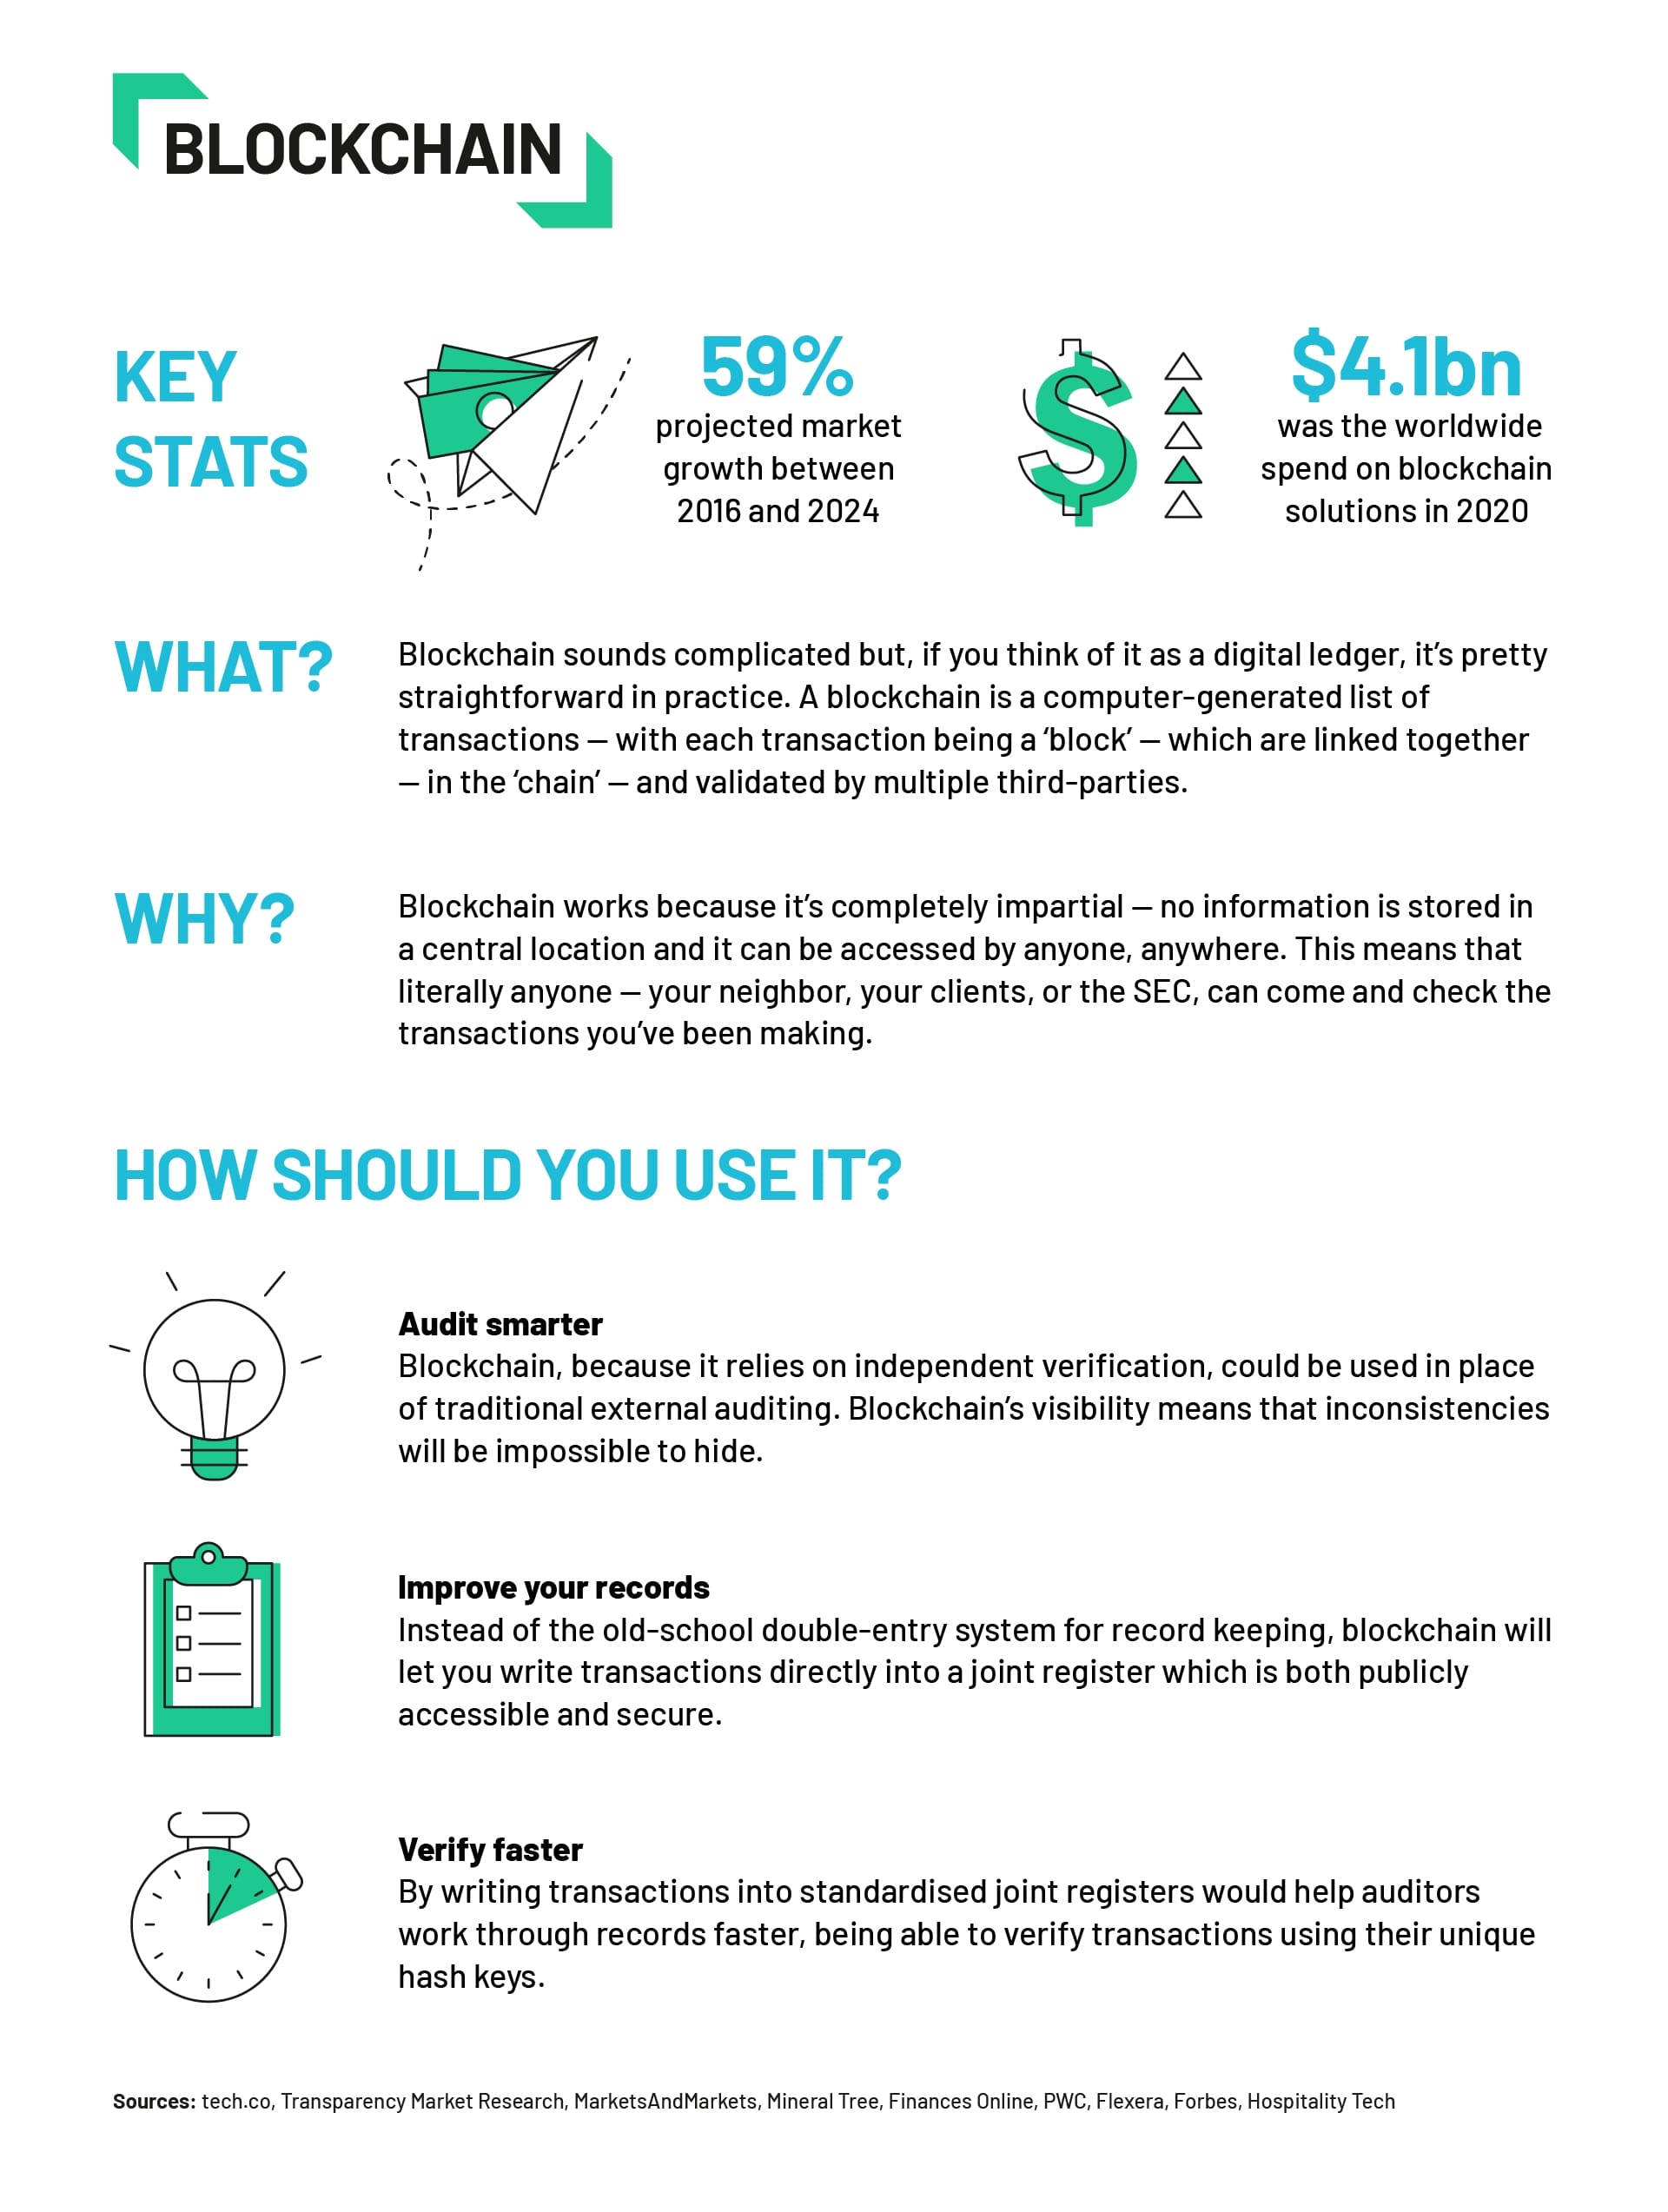 accounting trend - blockchain- tech.co infographic